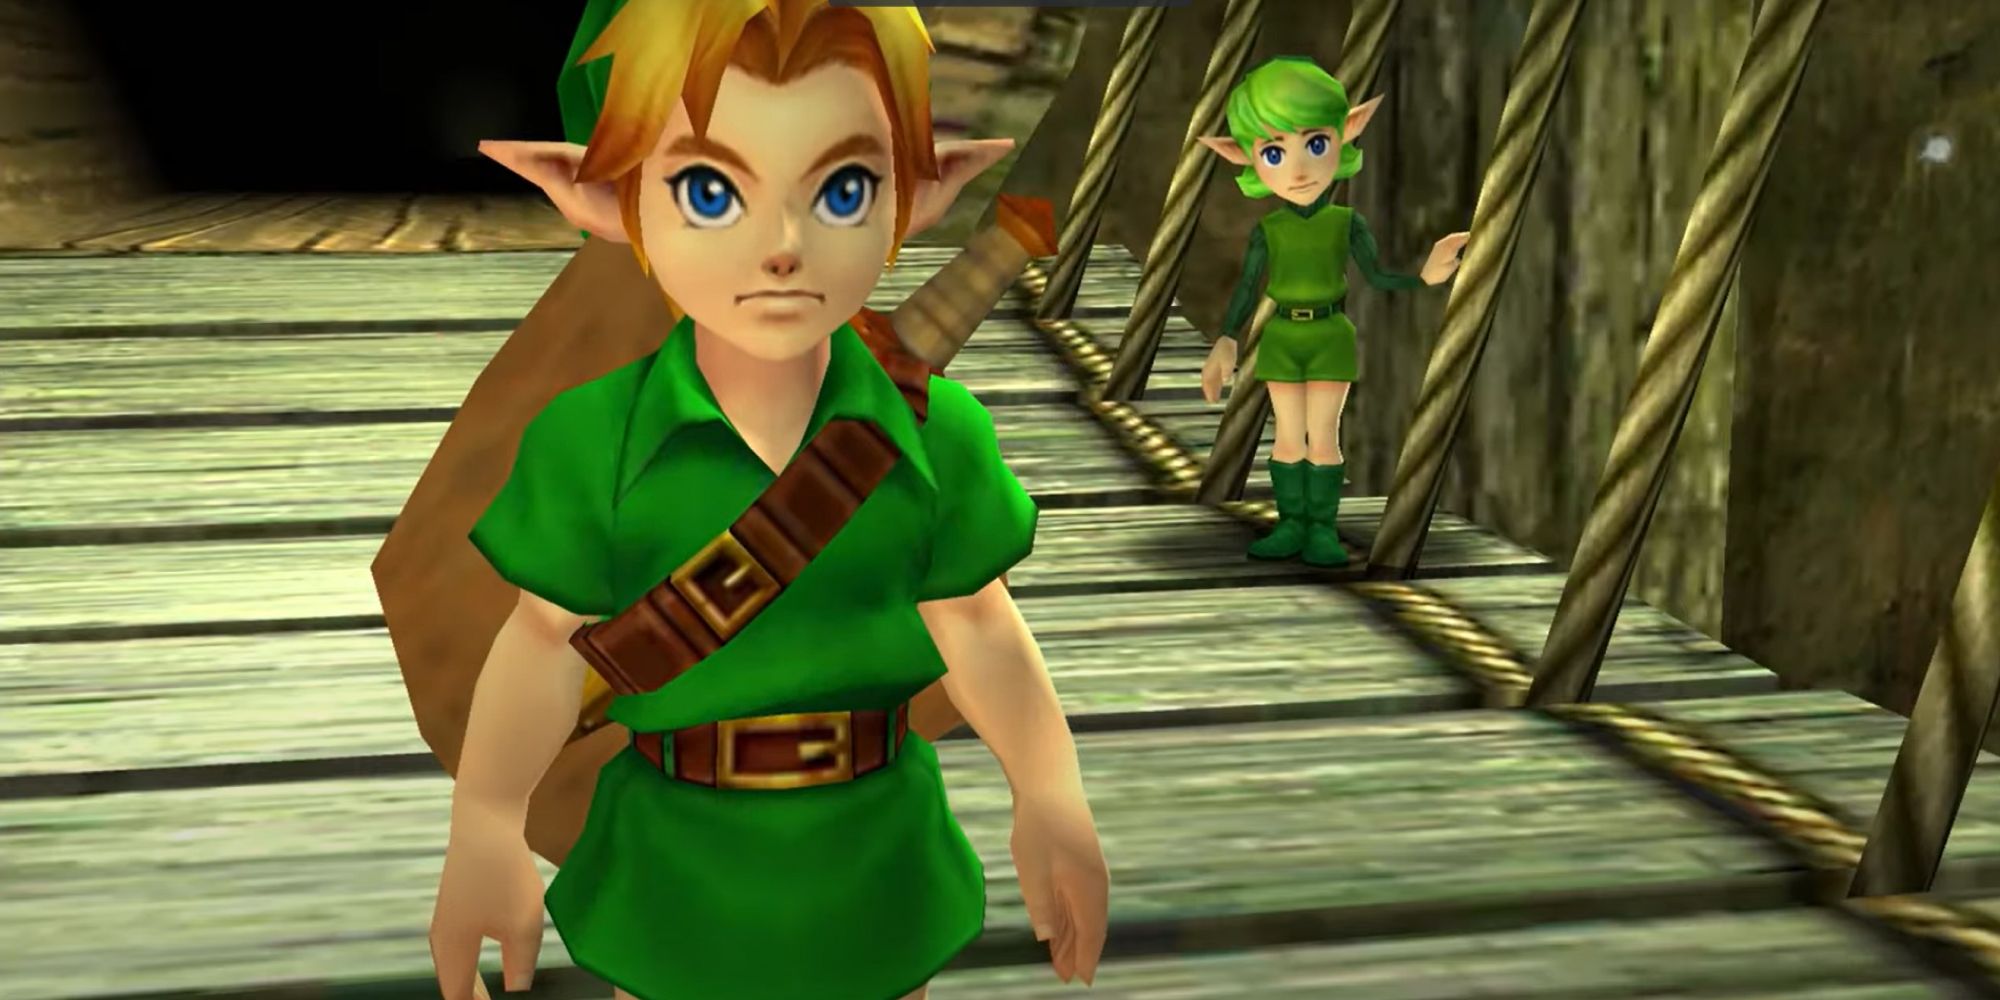 Ocarina of Time's Link Saying Good-Bye to Saria in Kokiri Forest